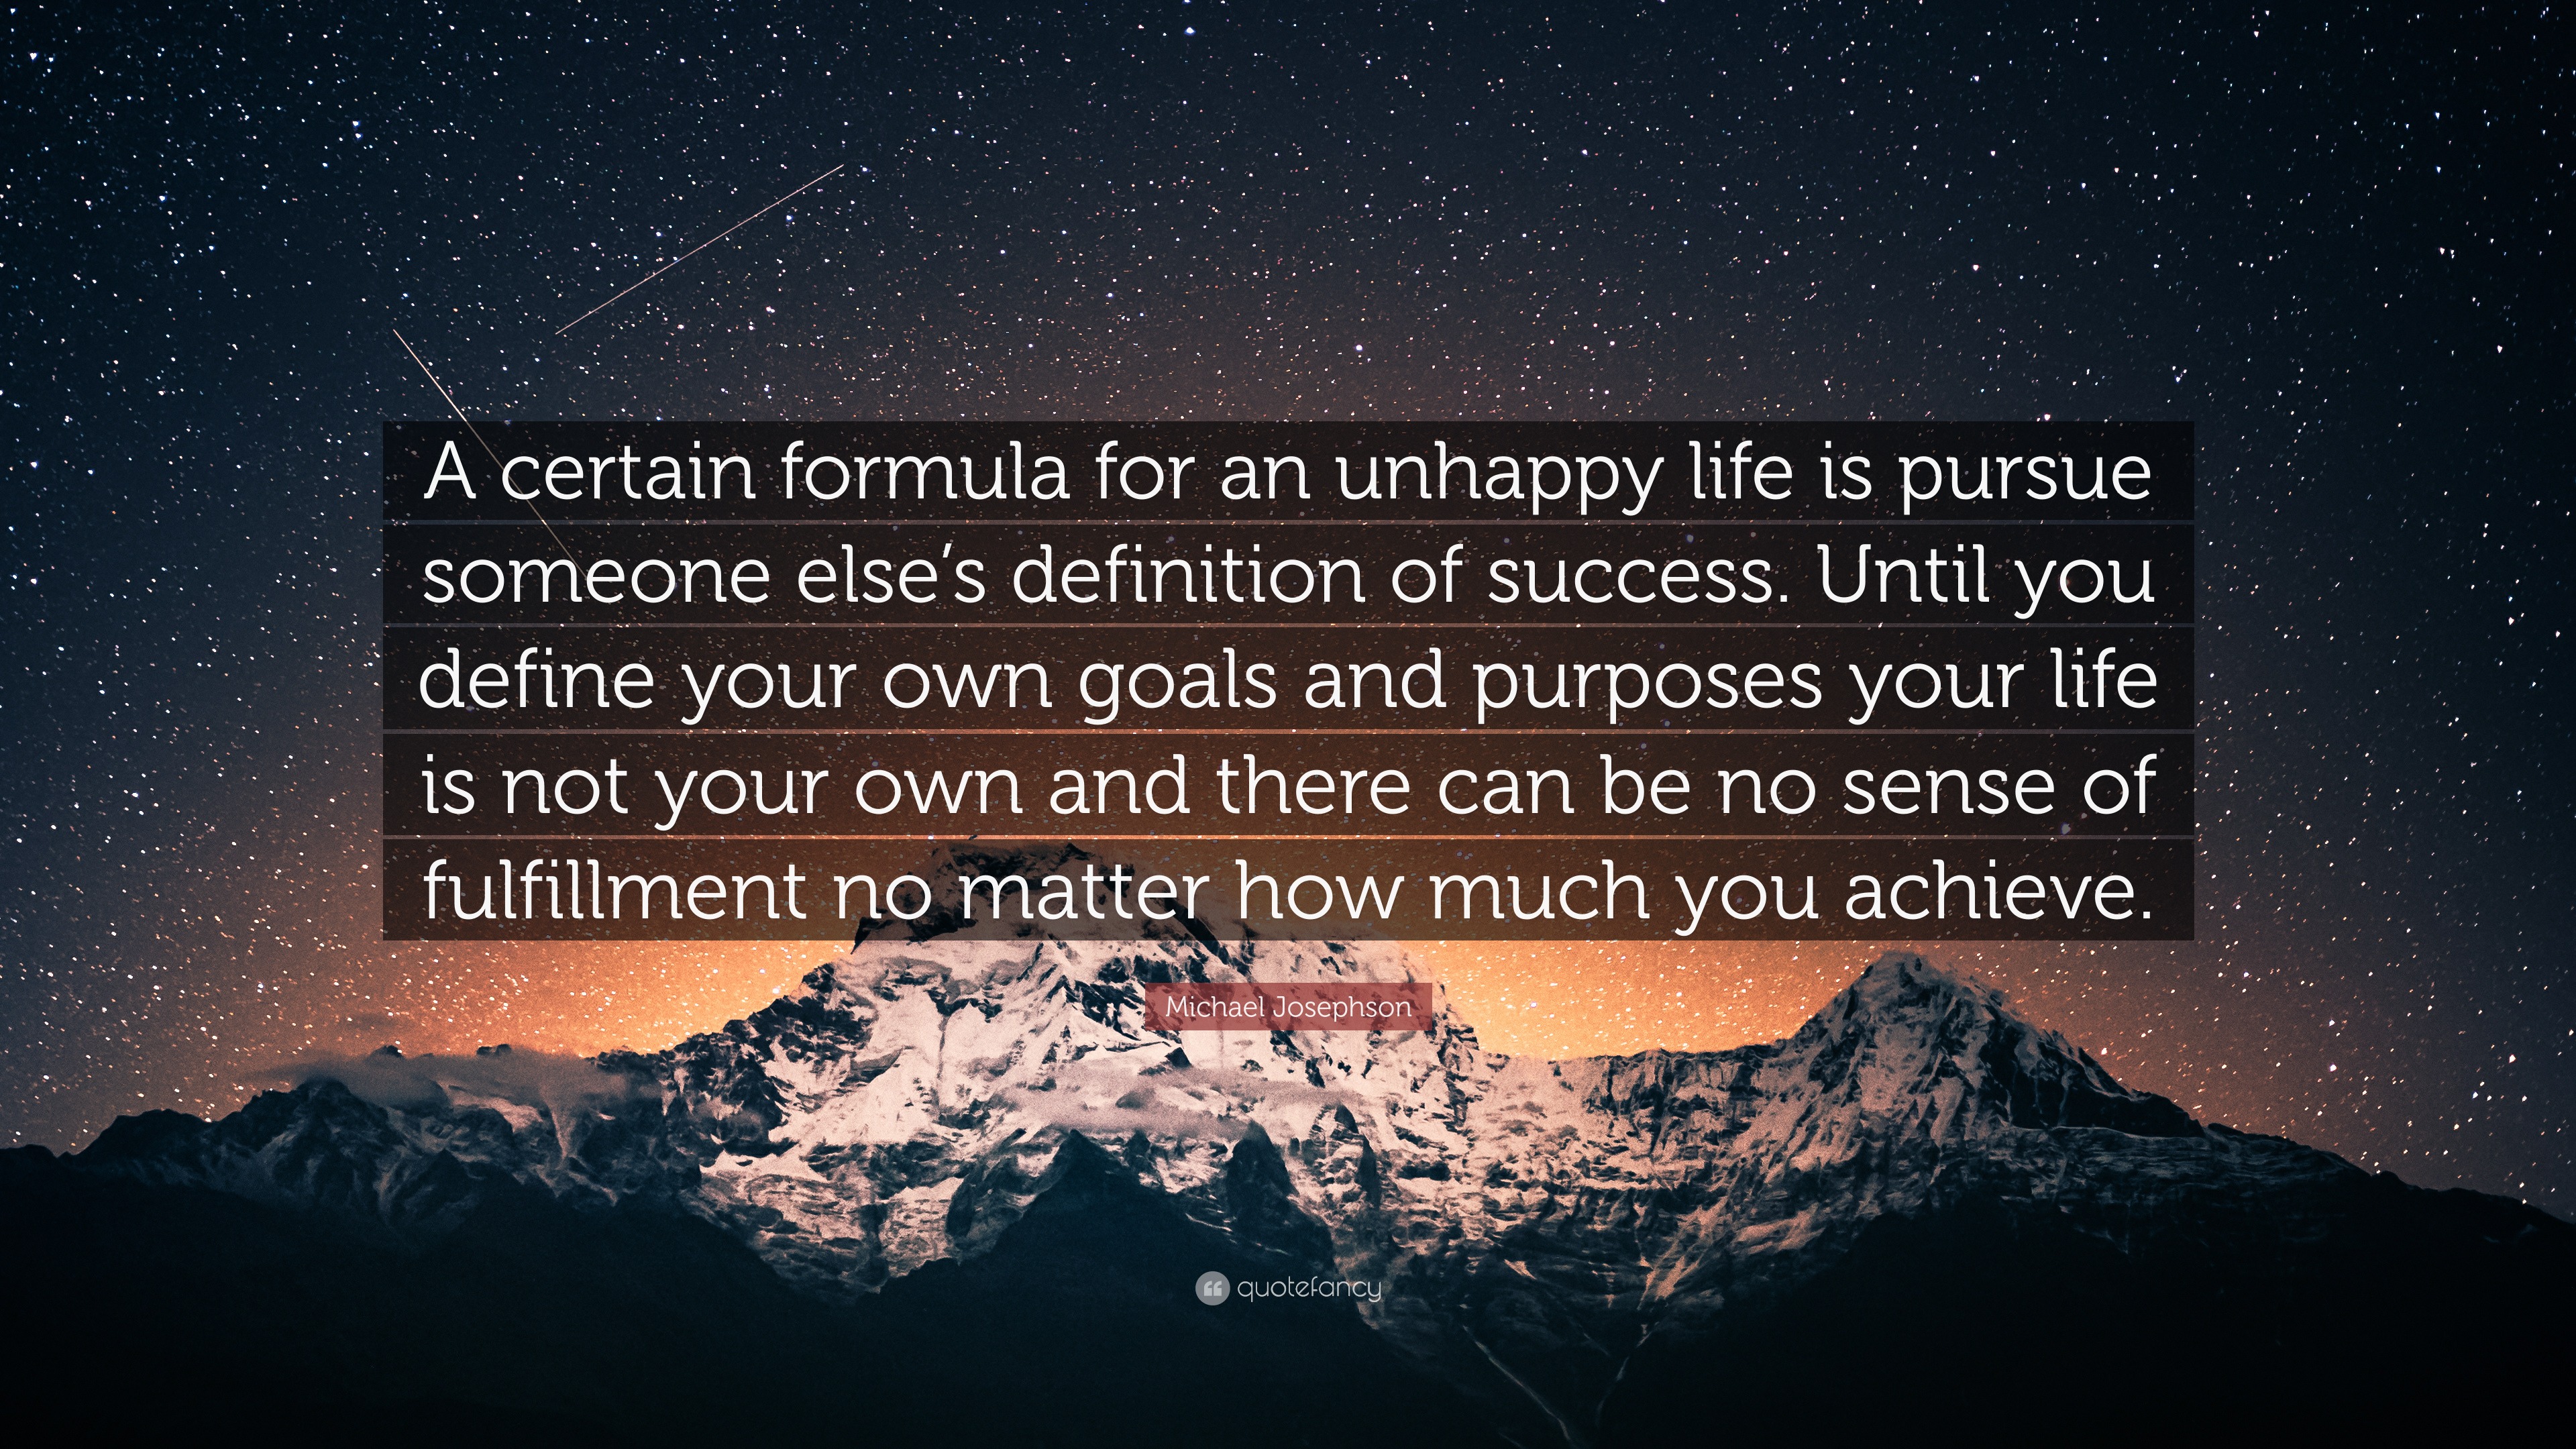 Michael Josephson Quote A Certain Formula For An Unhappy Life Is Pursue Someone Else S Definition Of Success Until You Define Your Own Goals An